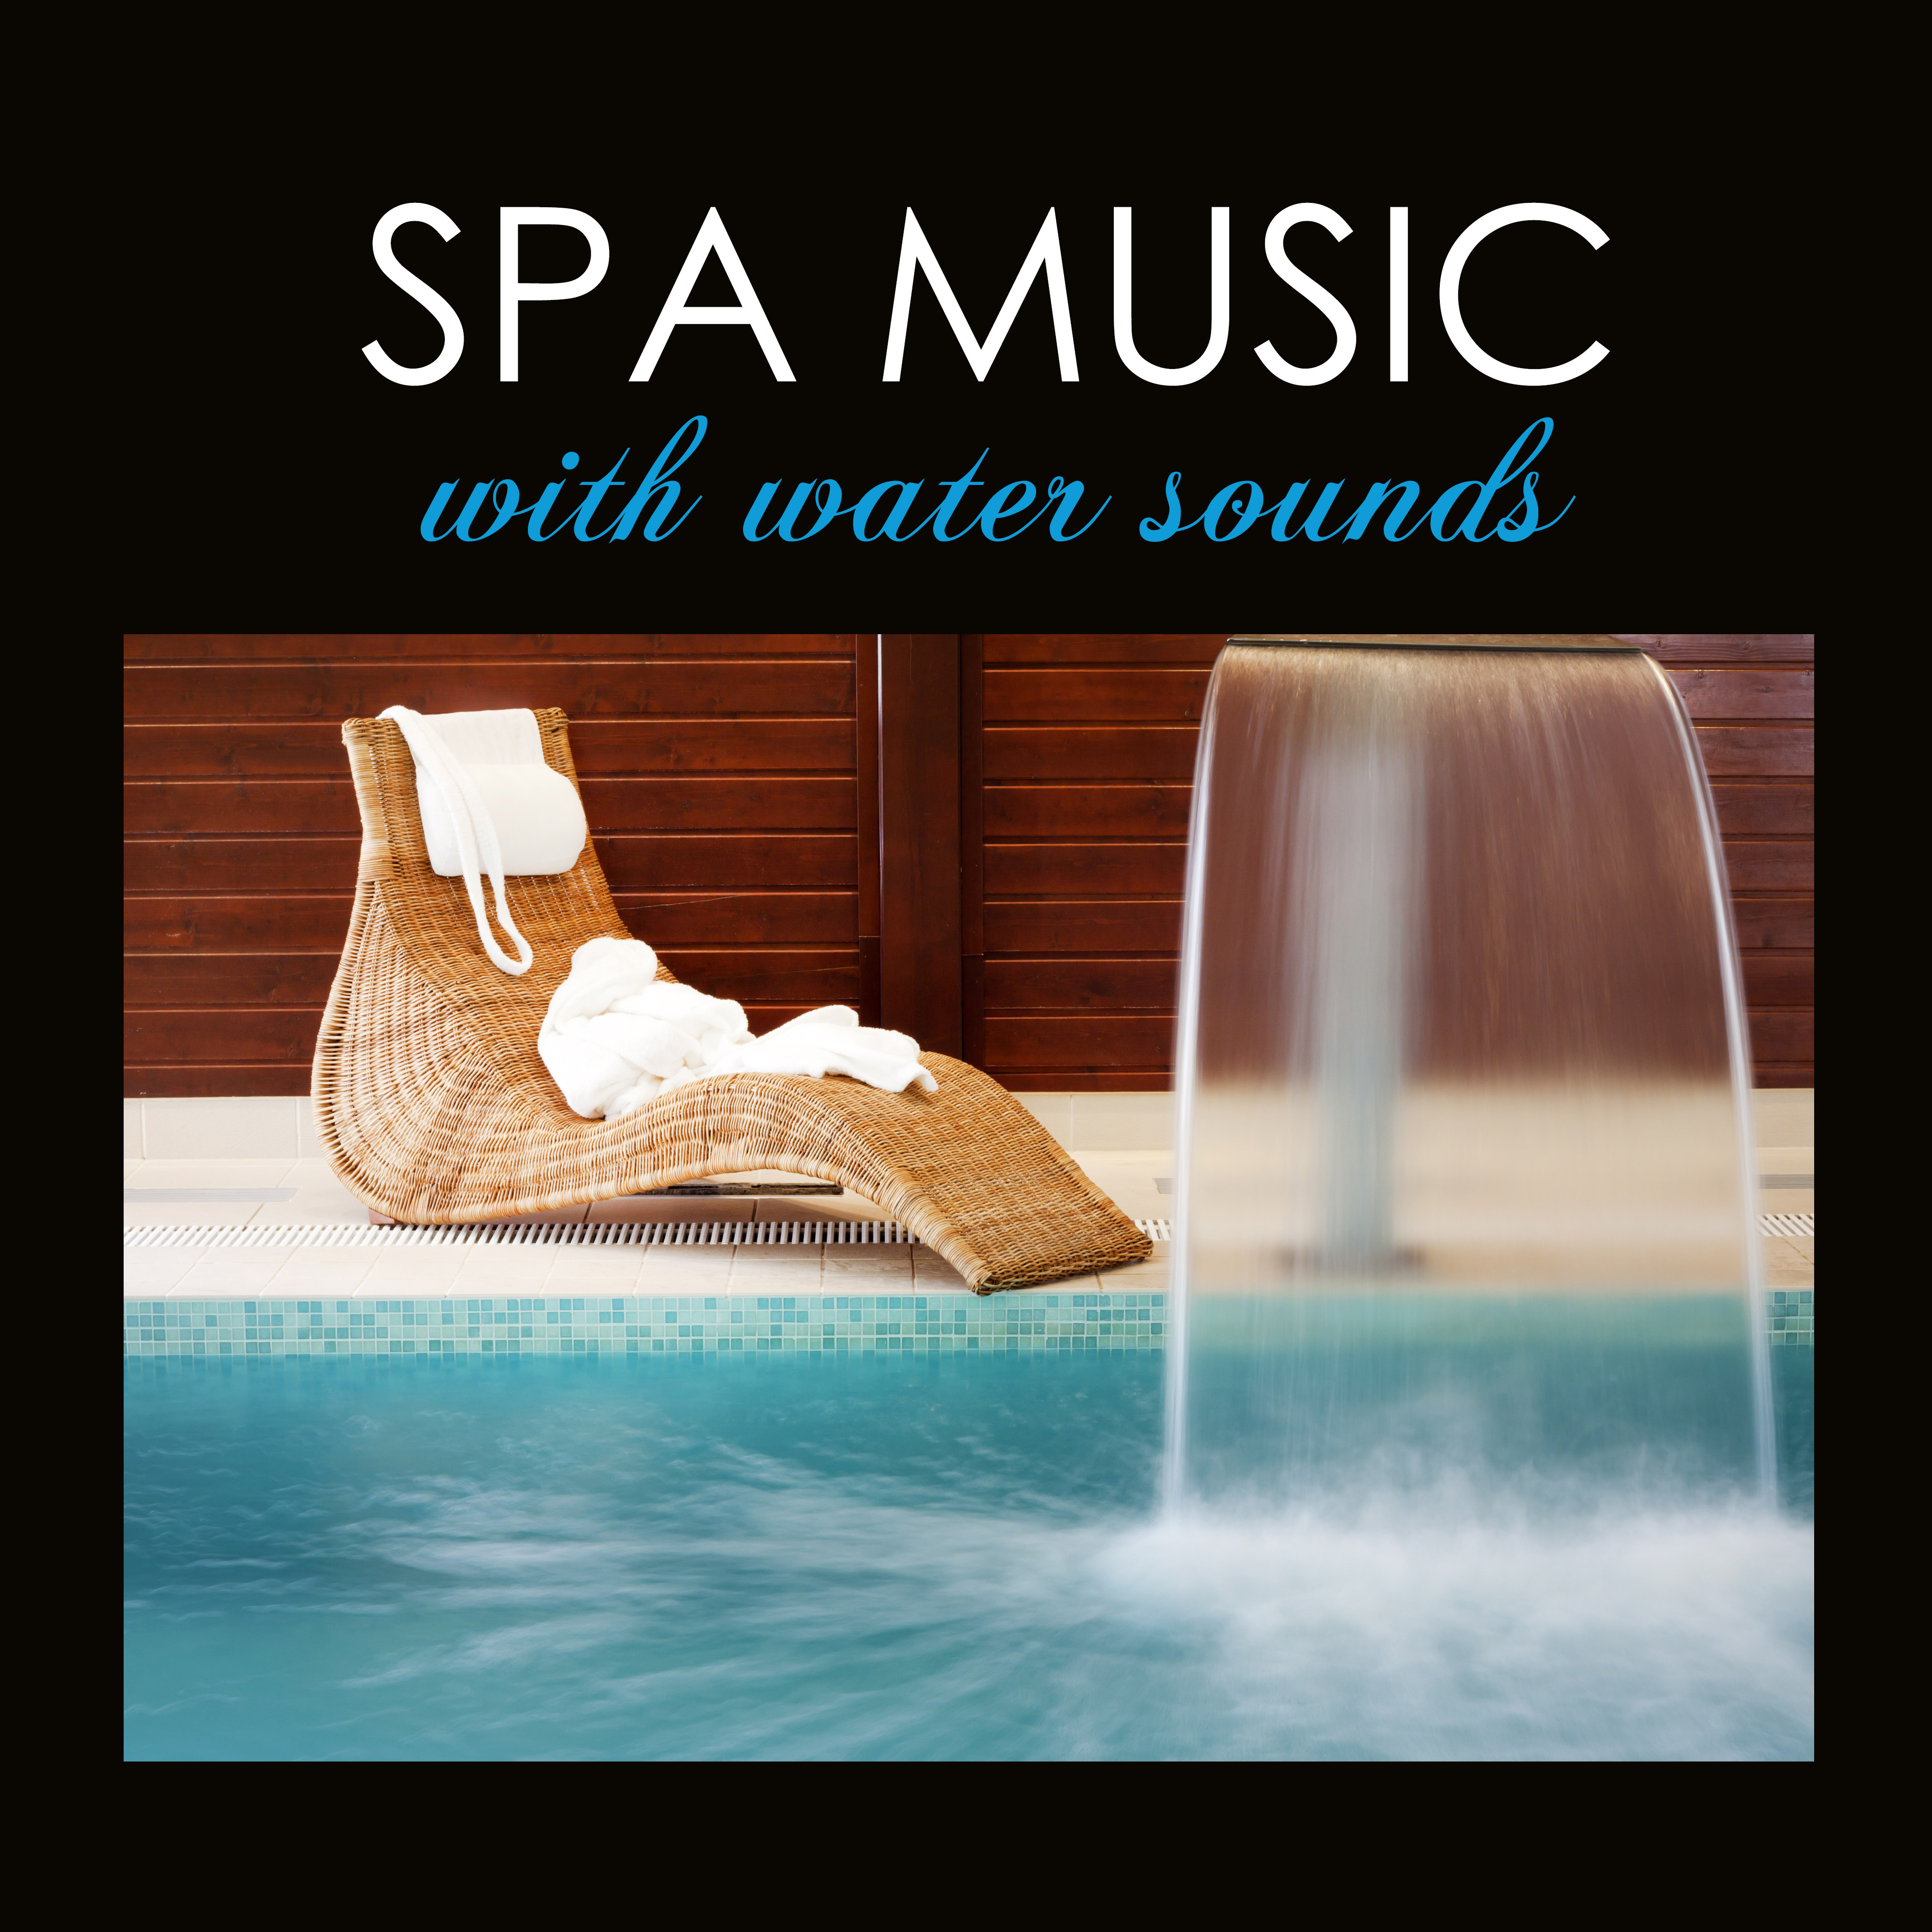 Spa Music with Water Sounds - Relaxing Spas Songs with Sea & Ocean Nature Sound Background